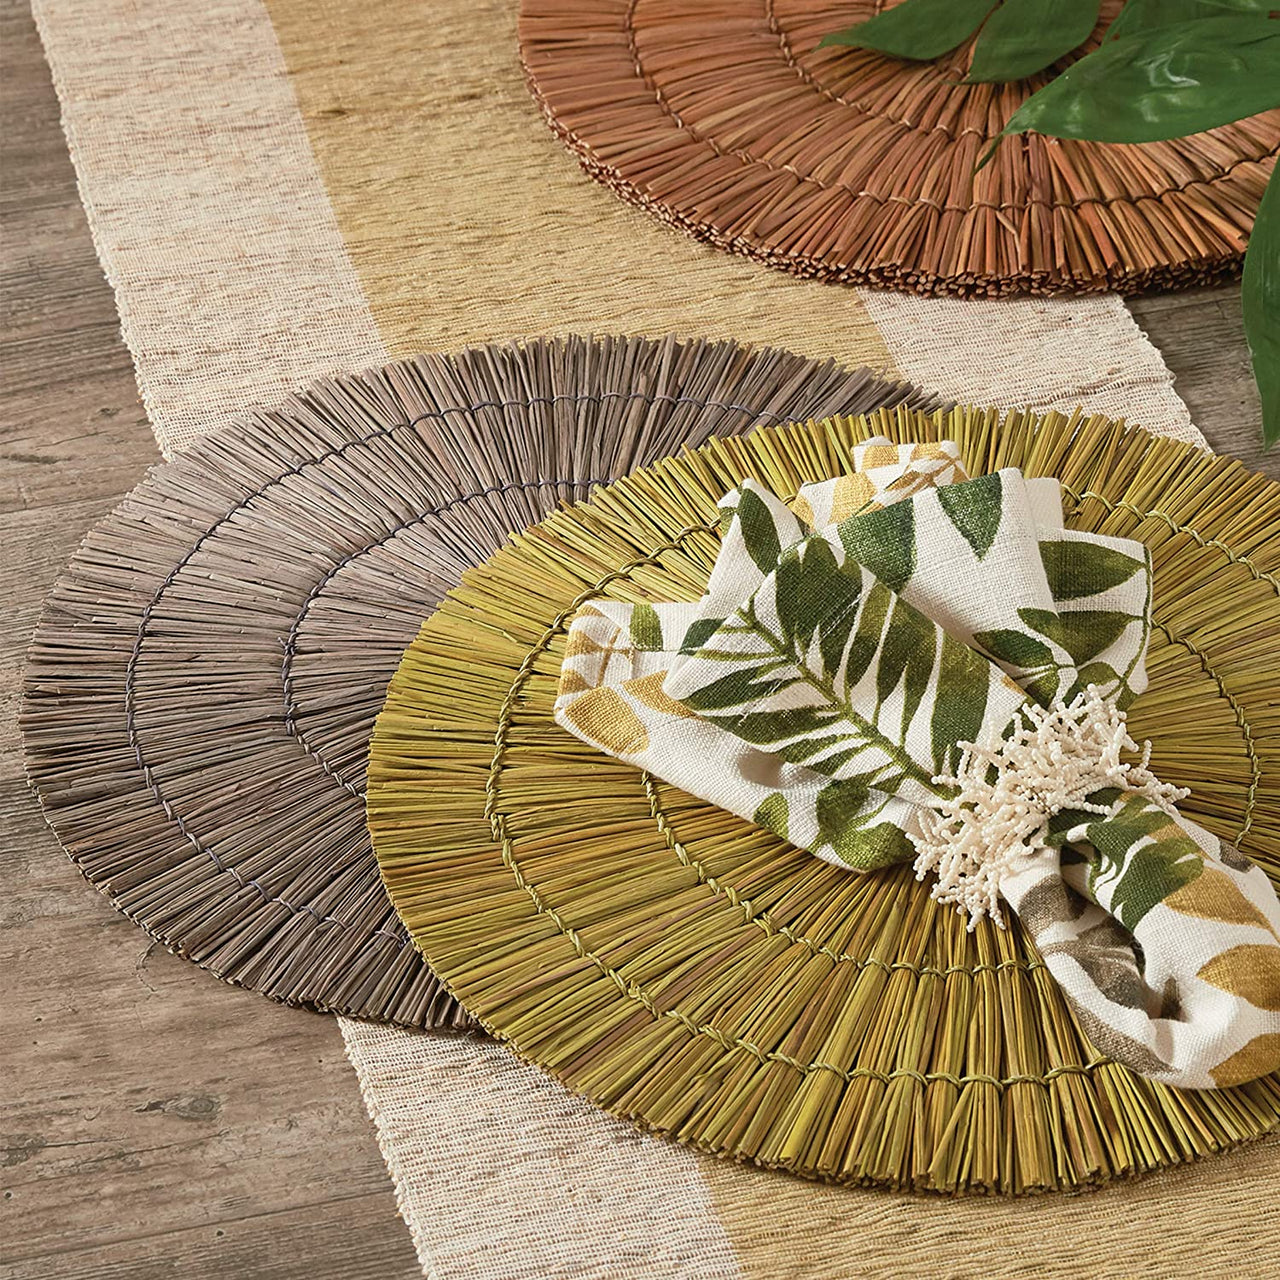 Seagrass Round Placemat - Stone Set Of 6 Park Designs